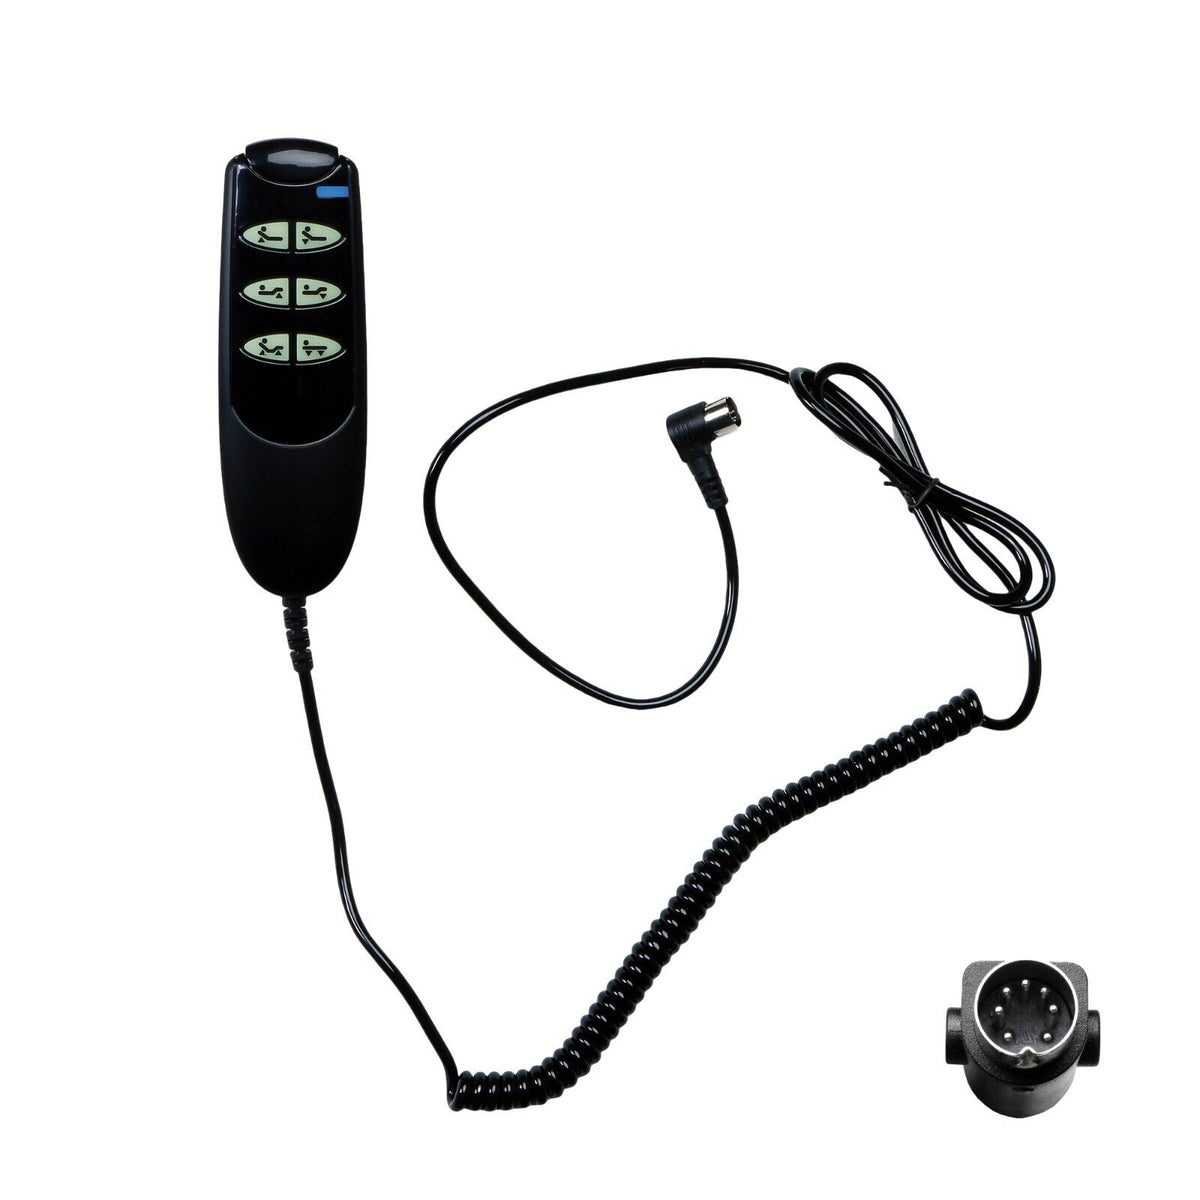 Fruhdi 6 Button 7 Pin Remote Hand Control Handset for Electric Hospital Beds Models 15033 and 15235